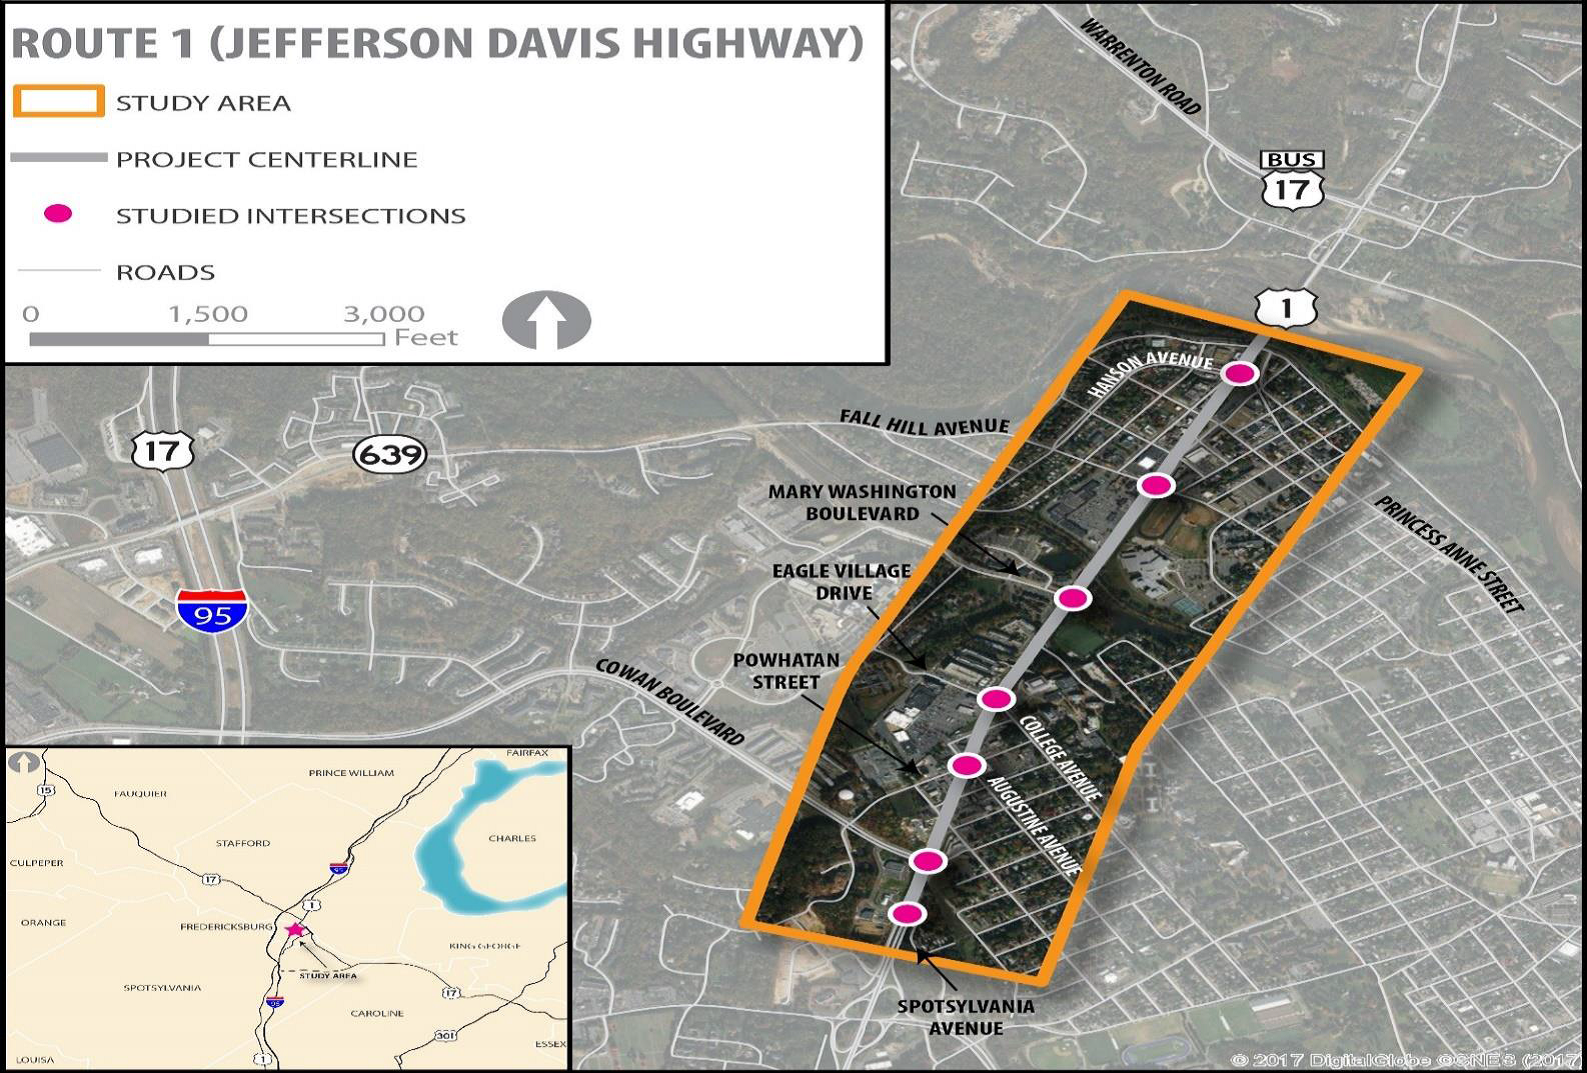 An outline of the area that has been identified as in need of changes. While several projects aim to improve traffic in these areas, there are no construction dates or firm funding available yet for any of the proposals. (Courtesy of VDOT)